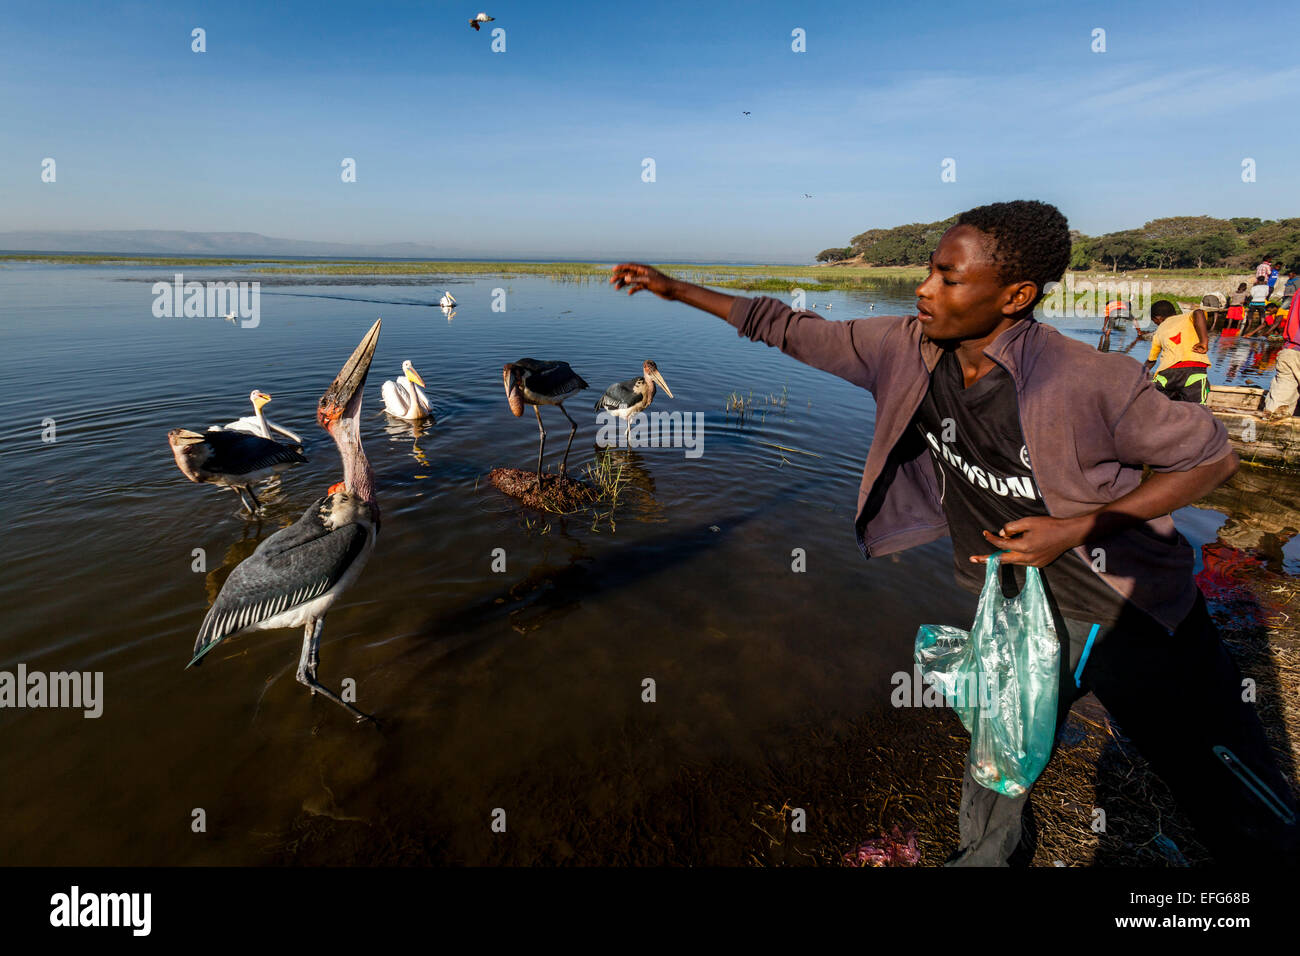 A Local Boy Feeds Marabou Storks and Pelicans With Fish Pieces, The Fish Market, Lake Hawassa, Hawassa, Ethiopia Stock Photo